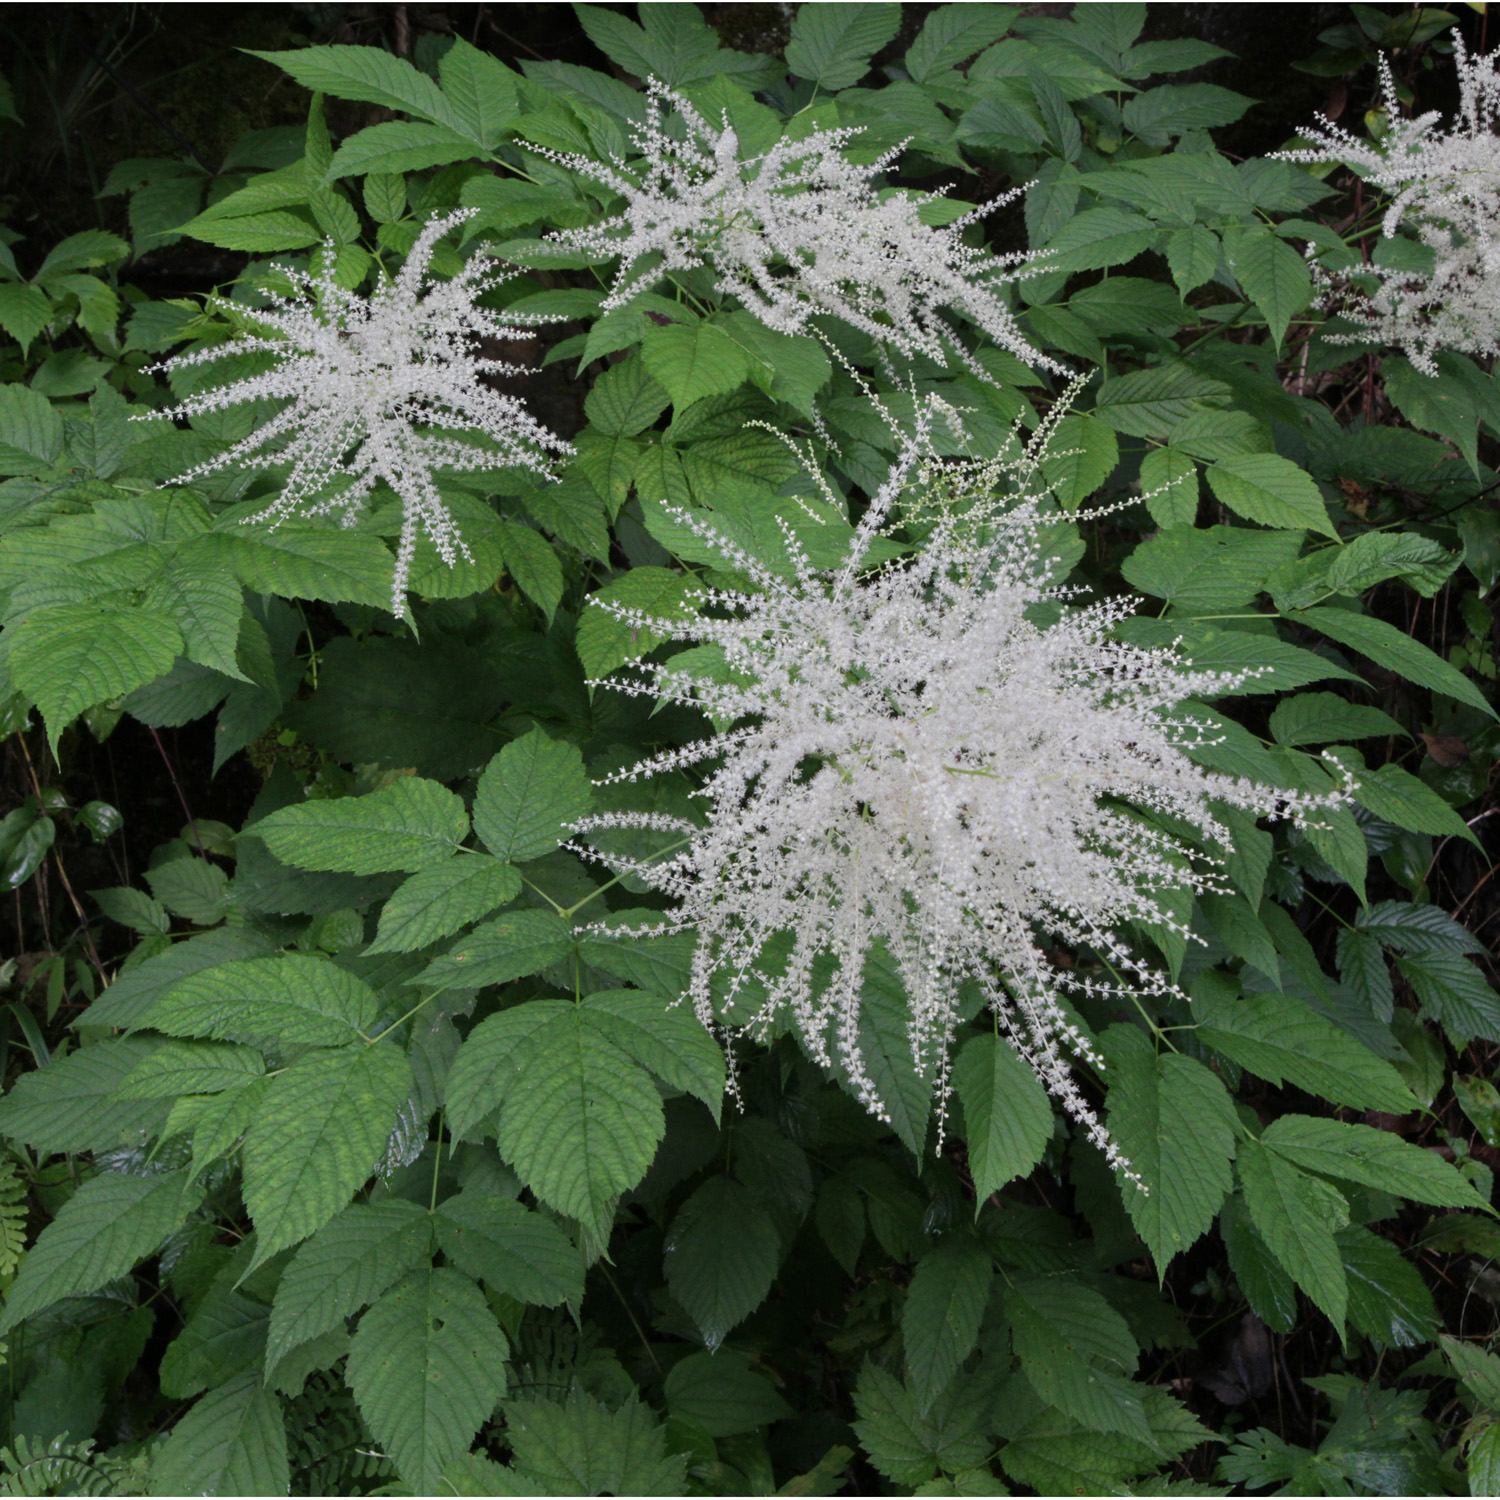 The Scientific Name is Aruncus dioicus var. dioicus. You will likely hear them called Eastern Goat's-beard. This picture shows the Goat's-beard is a showy specimen plant as plumes of  bright white blossoms contrast with handsome, textured leaves. of Aruncus dioicus var. dioicus